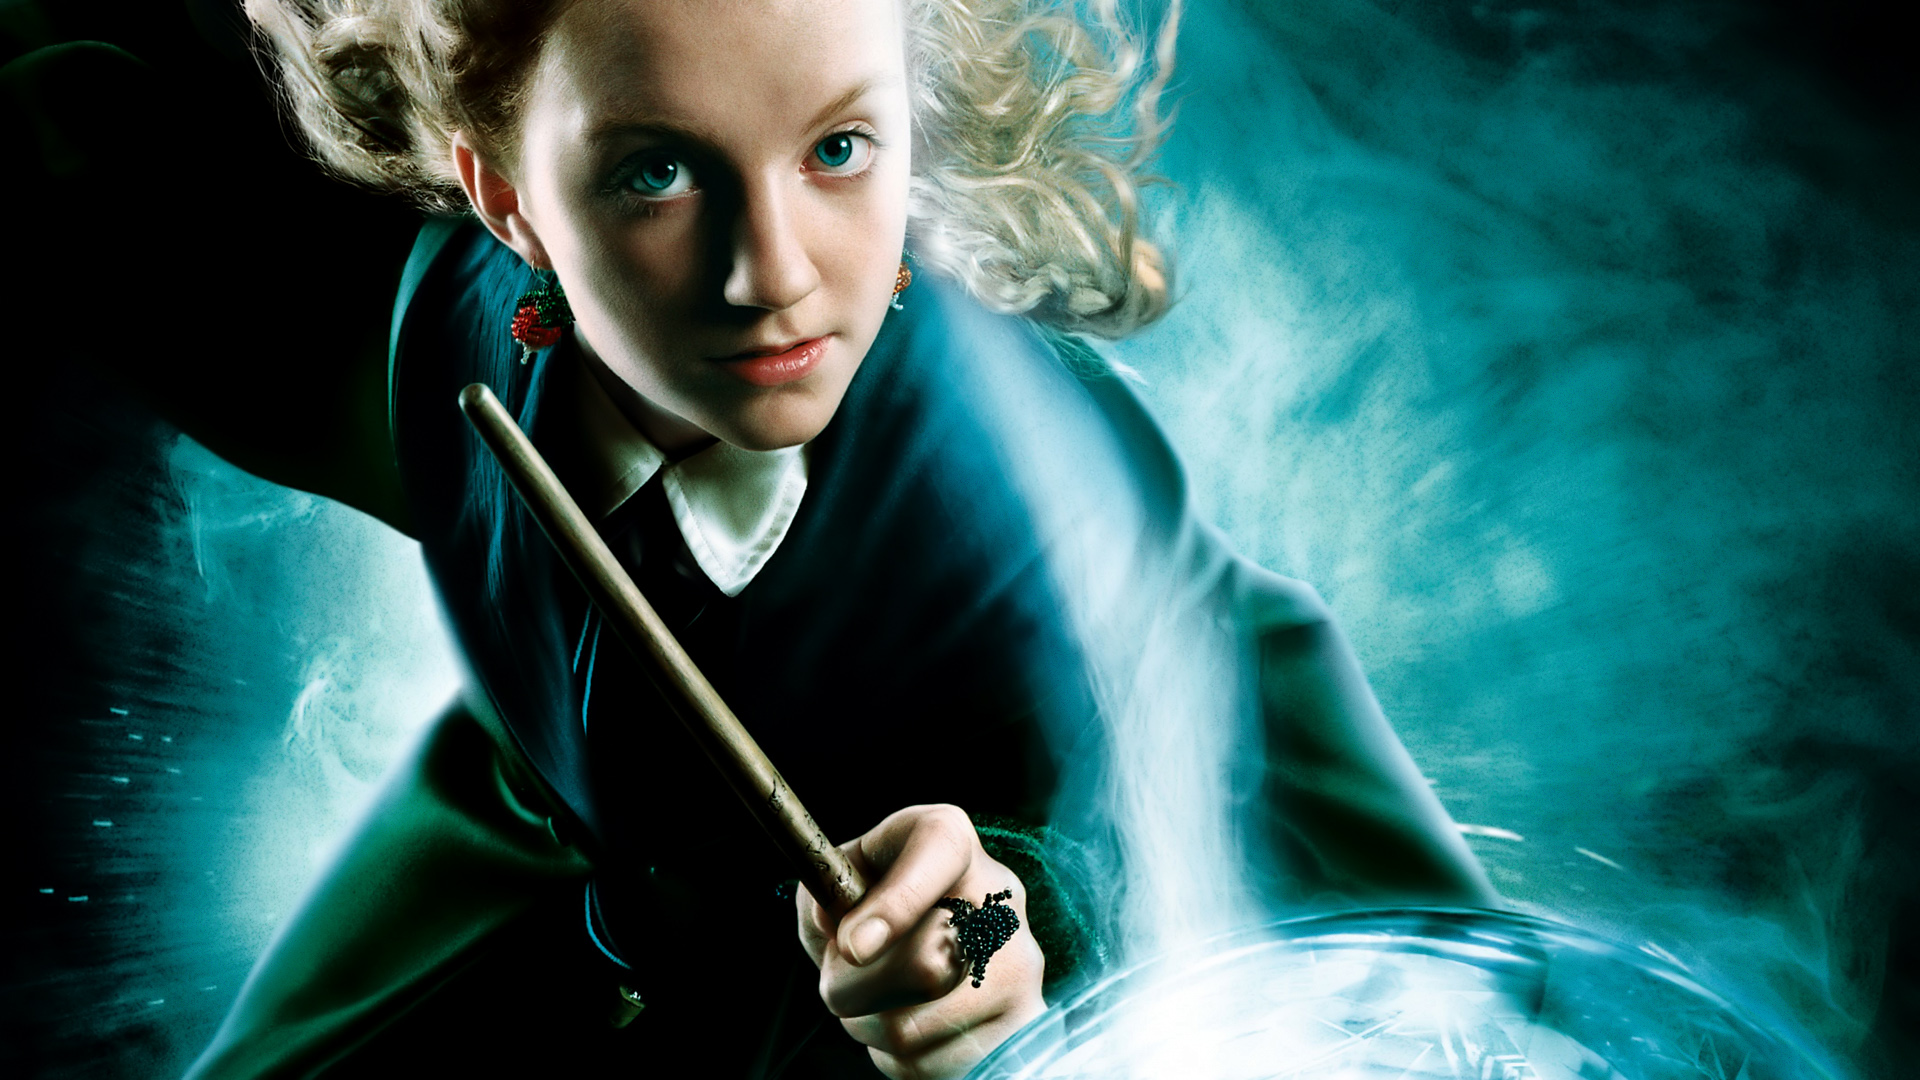 Movie Harry Potter and the Order of the Phoenix HD Wallpaper | Background Image